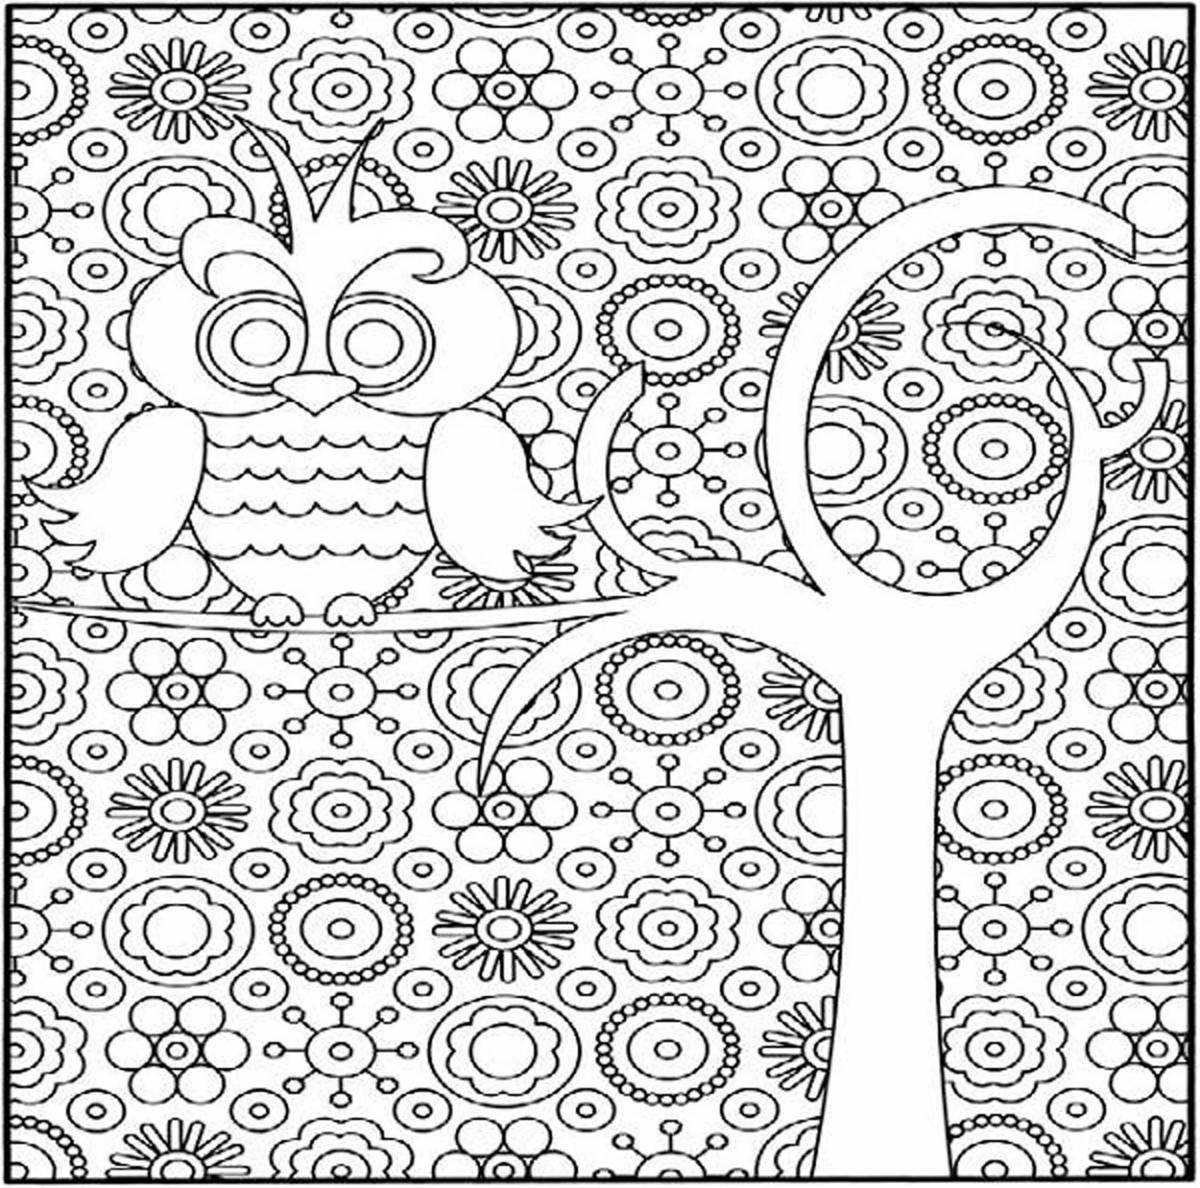 Relaxing 15 year anti-stress coloring book